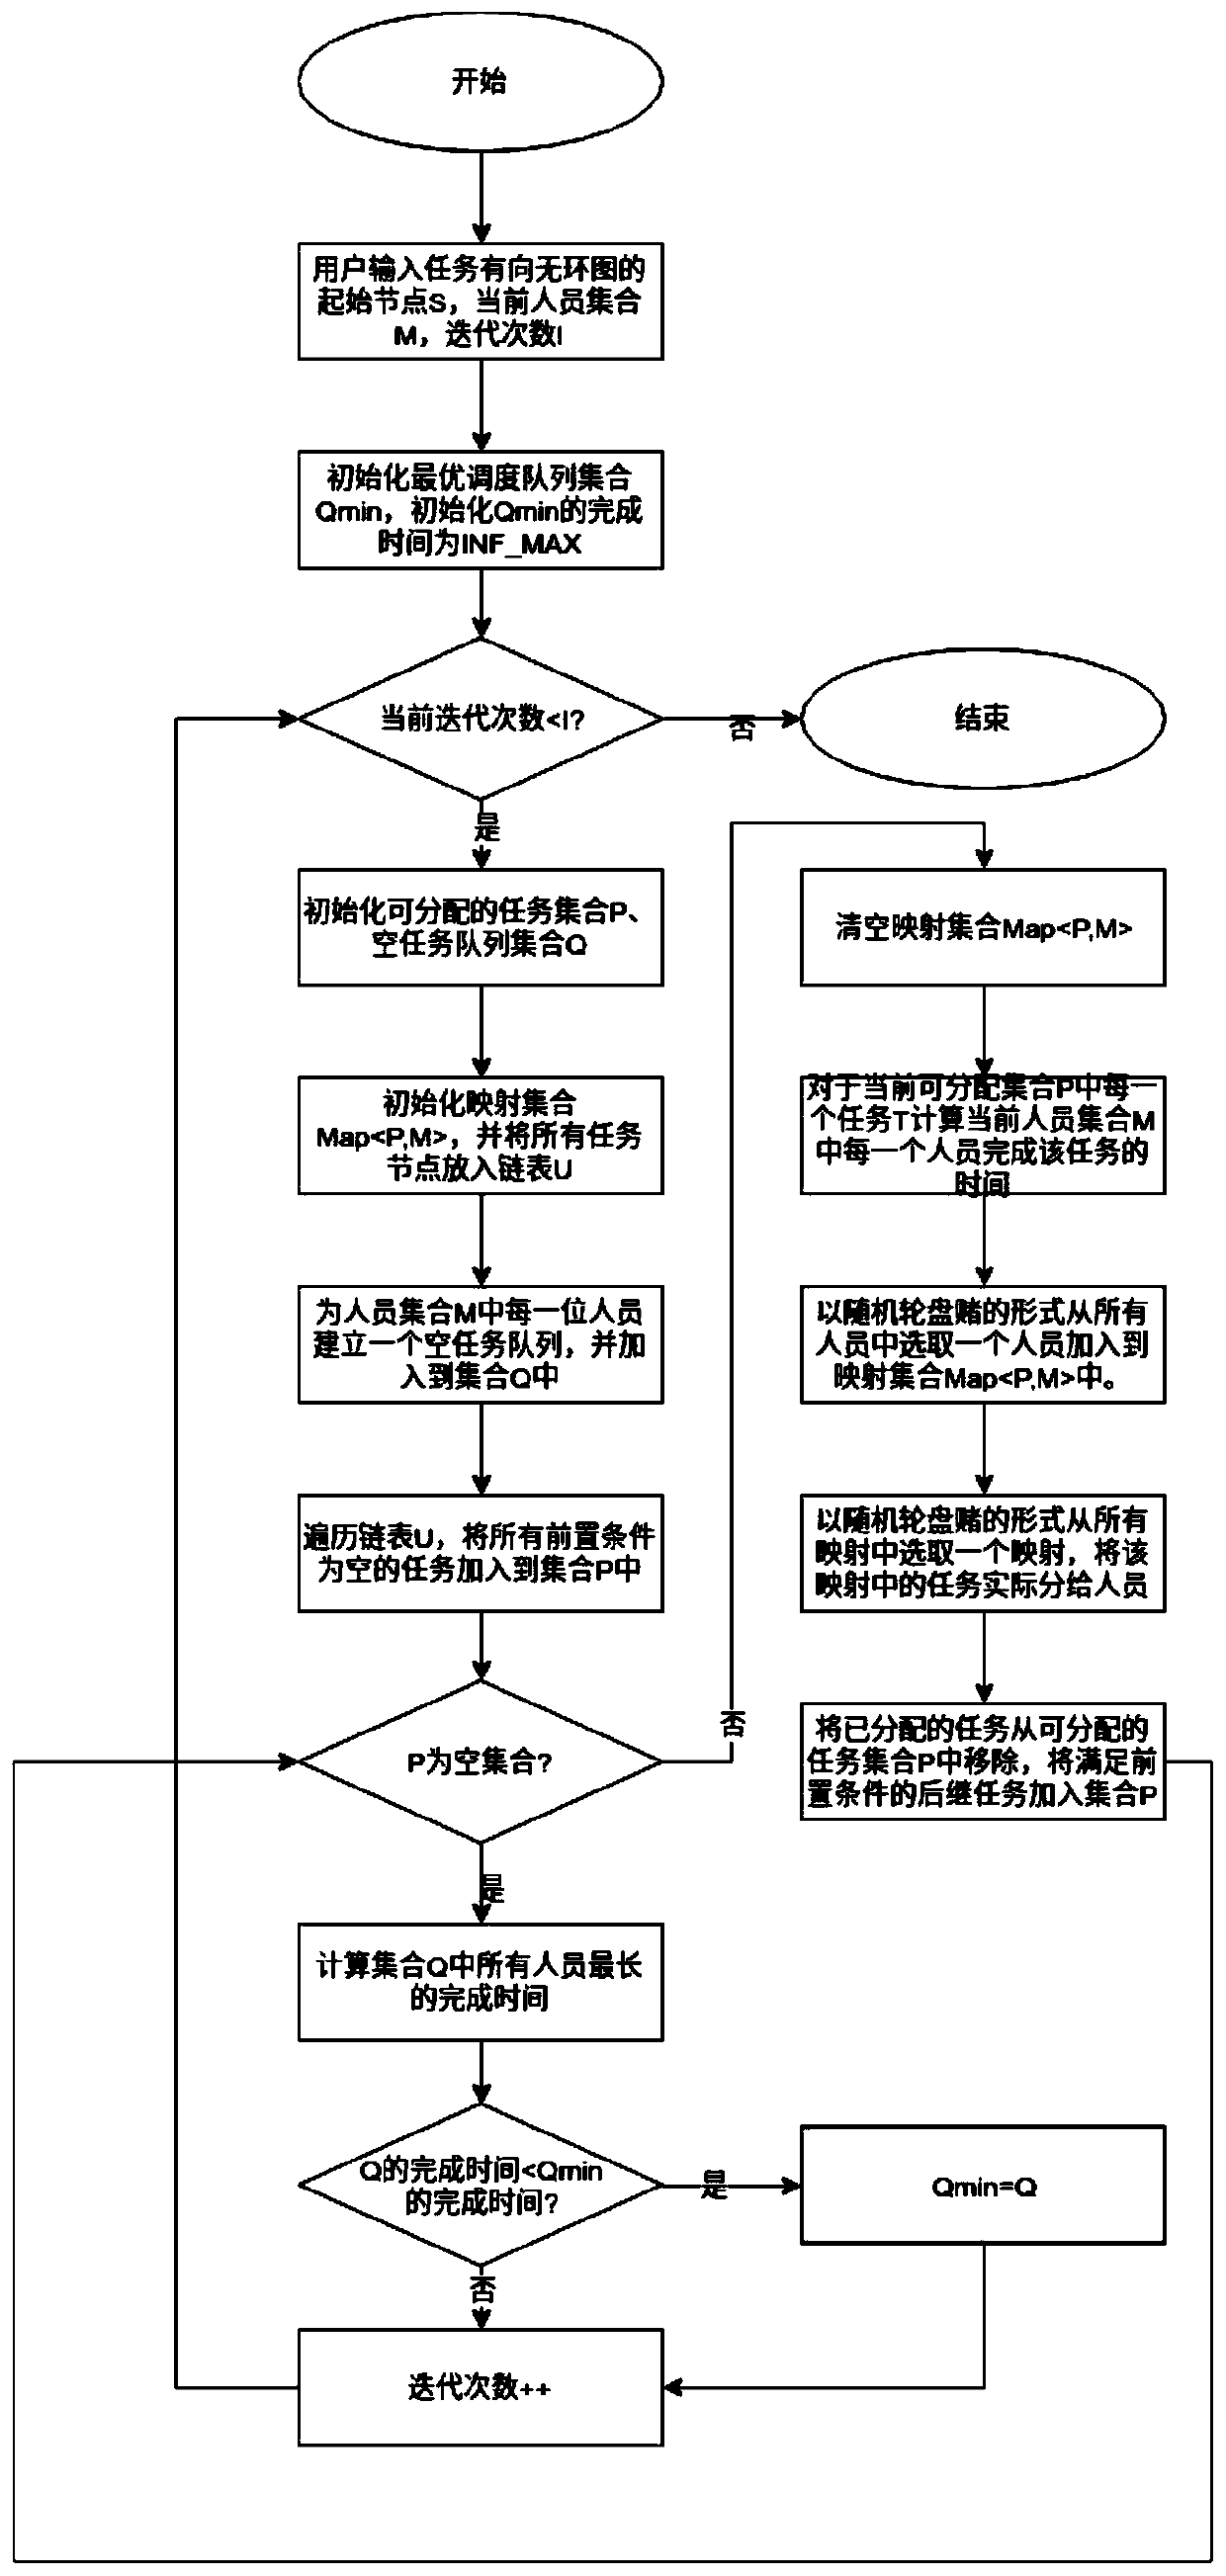 Airborne software development process scheduling method conforming to DO-178 standard